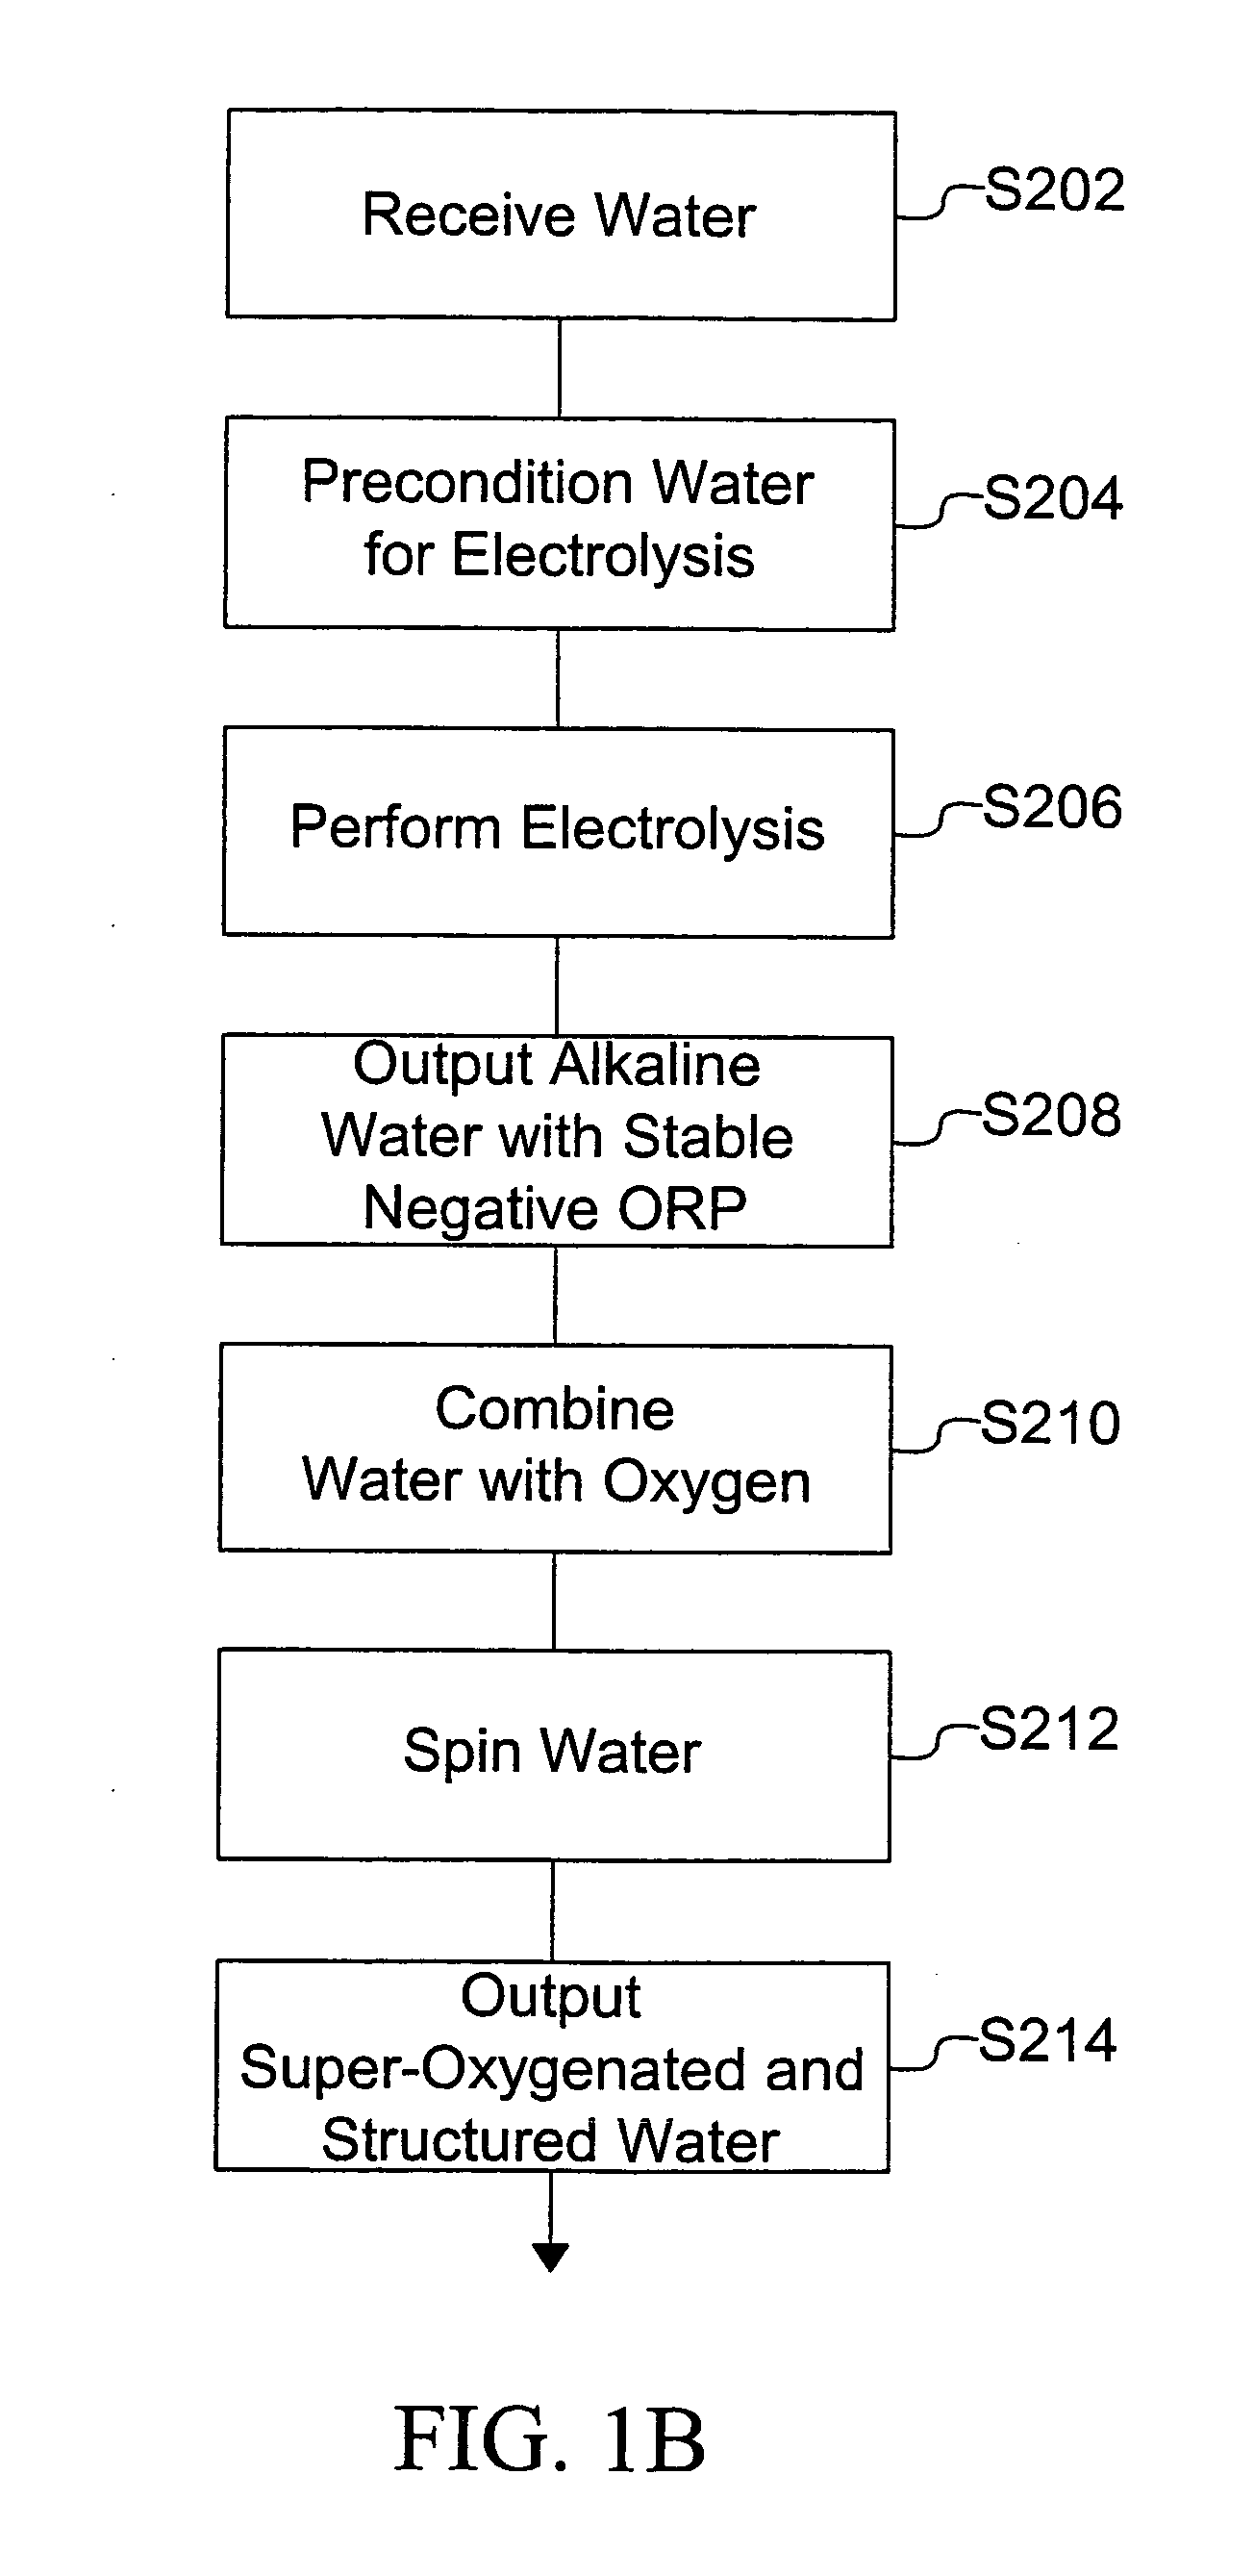 Method for making and conditioning super-oxygenated and structured water